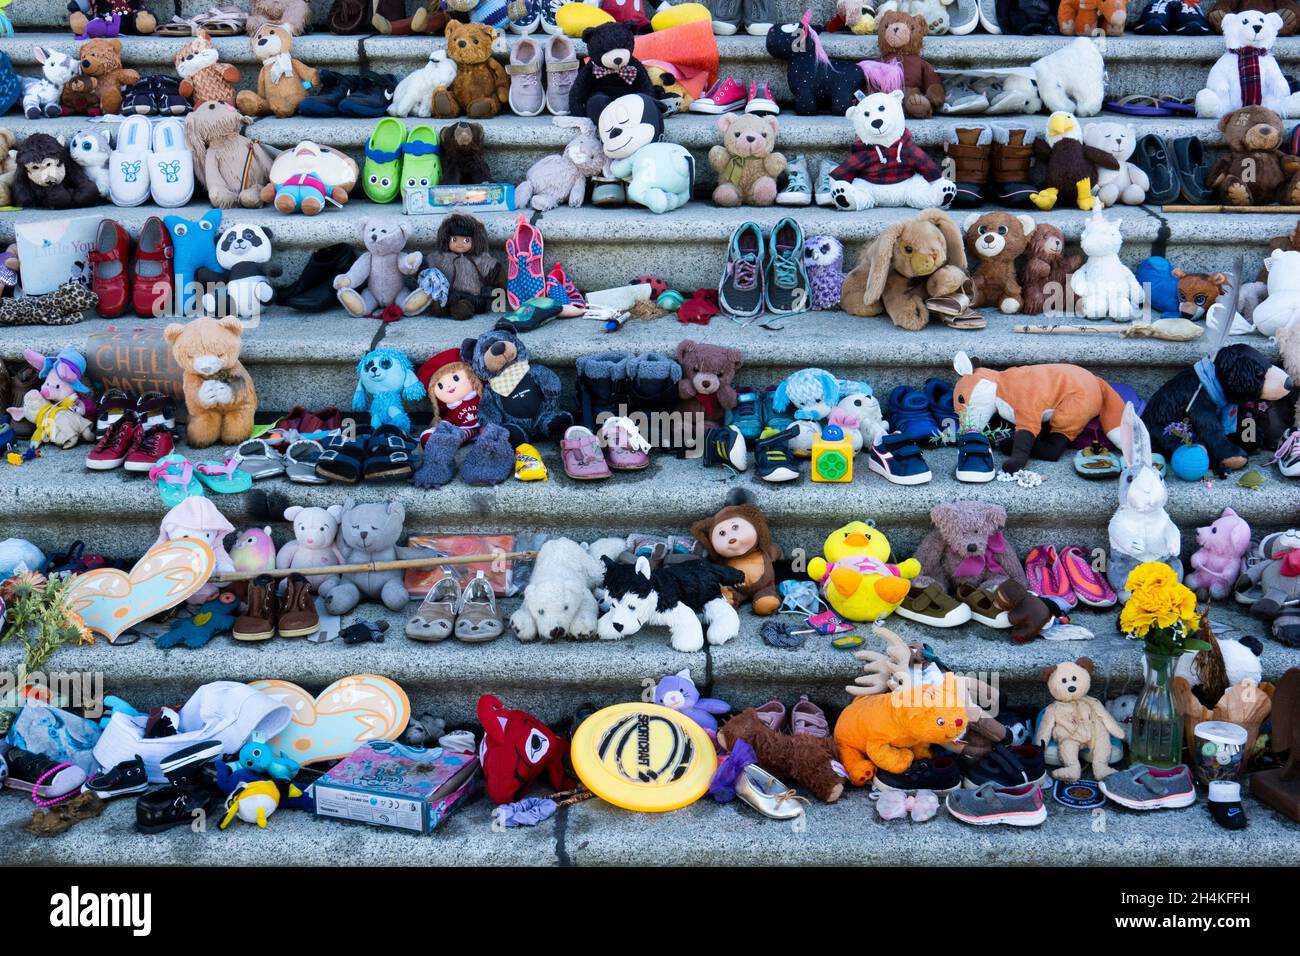 Memorial to missing indigenous children on the steps of the legislature in Victoria, BC, Canada. Stock Photo